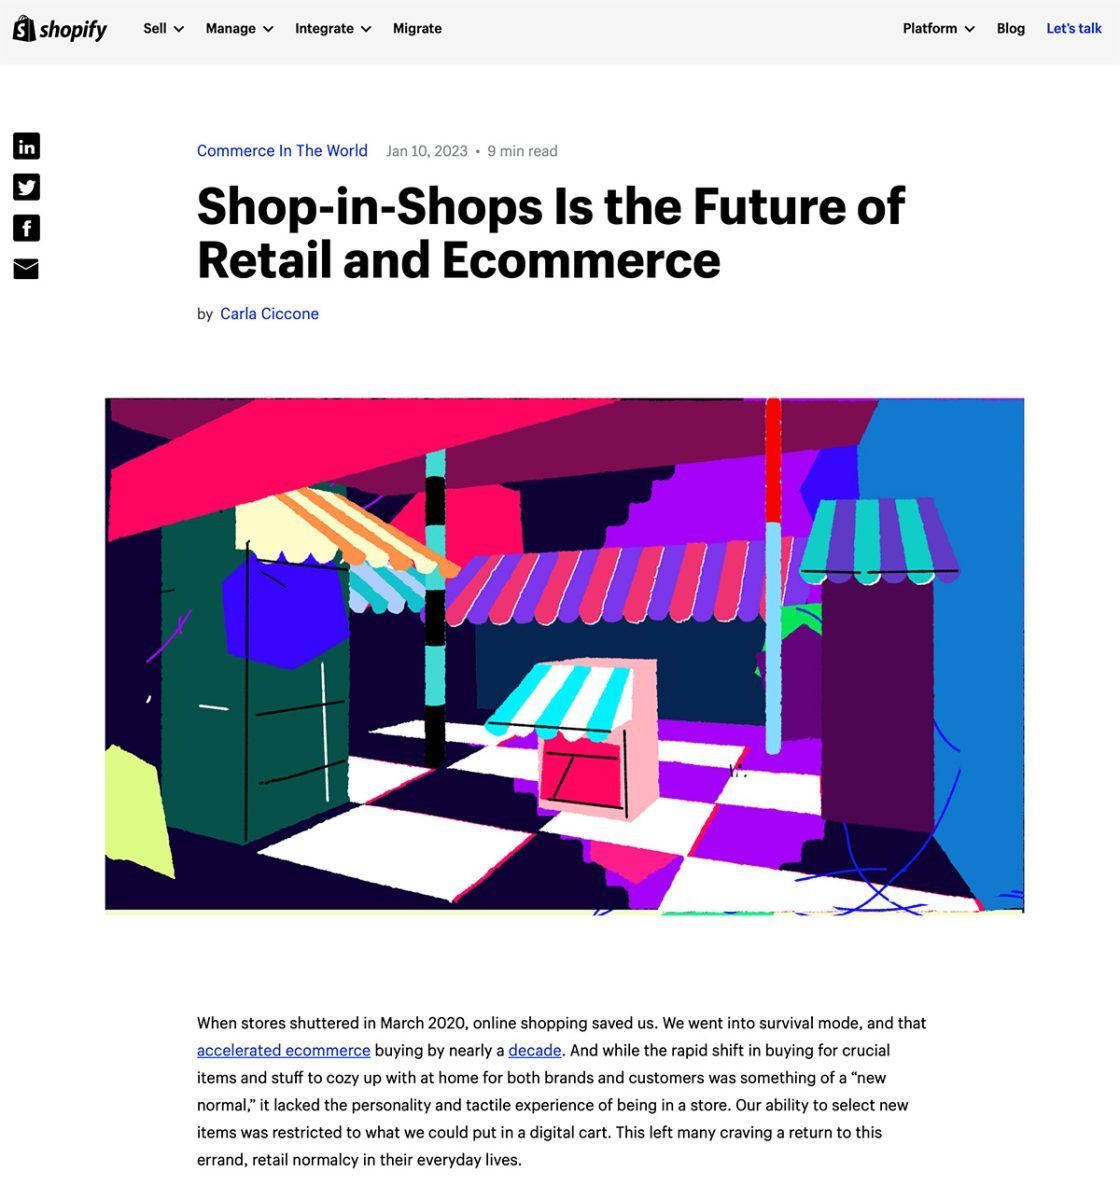 Shopify / Shop-in Shops is the Future of Retail and Ecommerce” - Wayne Mills - Anna Goodson Illustration Agency